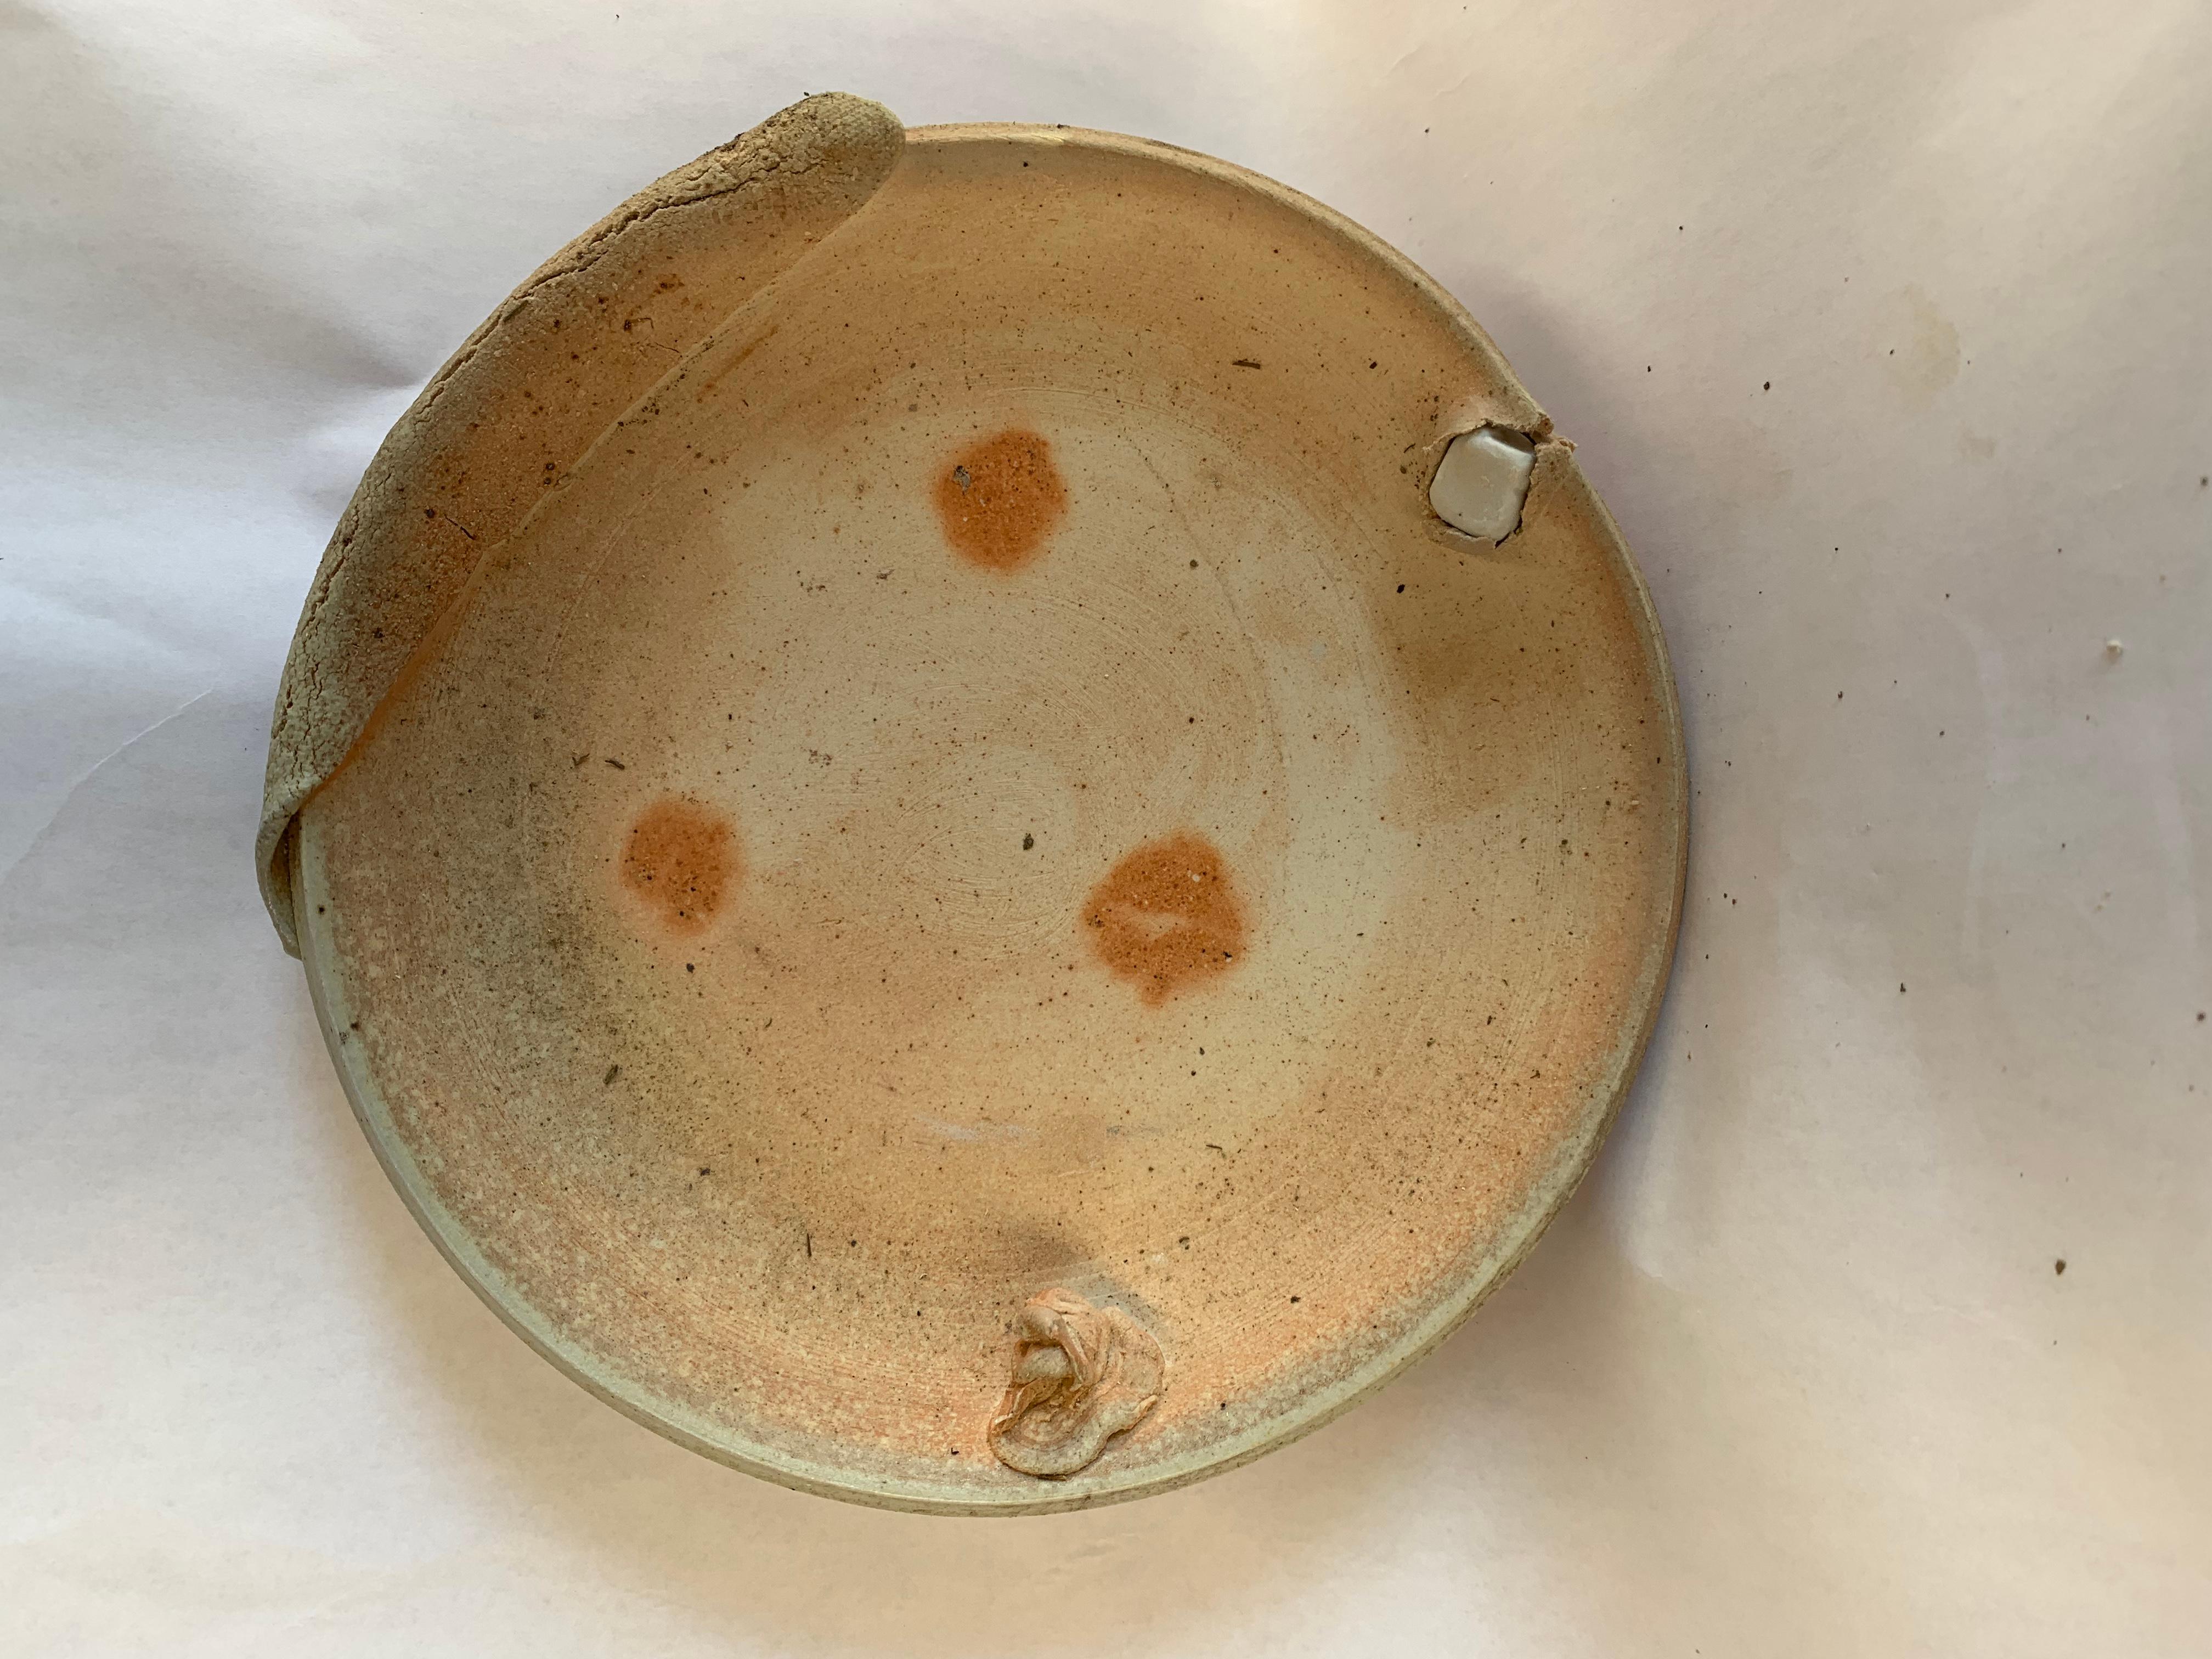 Wood-fired ceramic planter and saucer. These pieces are handmade with a combination of clays, and fired to Cone 10 in a wood-fired kiln. Influenced by Peter Voulkos, these pieces are very individualistic, one-of-a-kind. Functional as a flowerpot, or